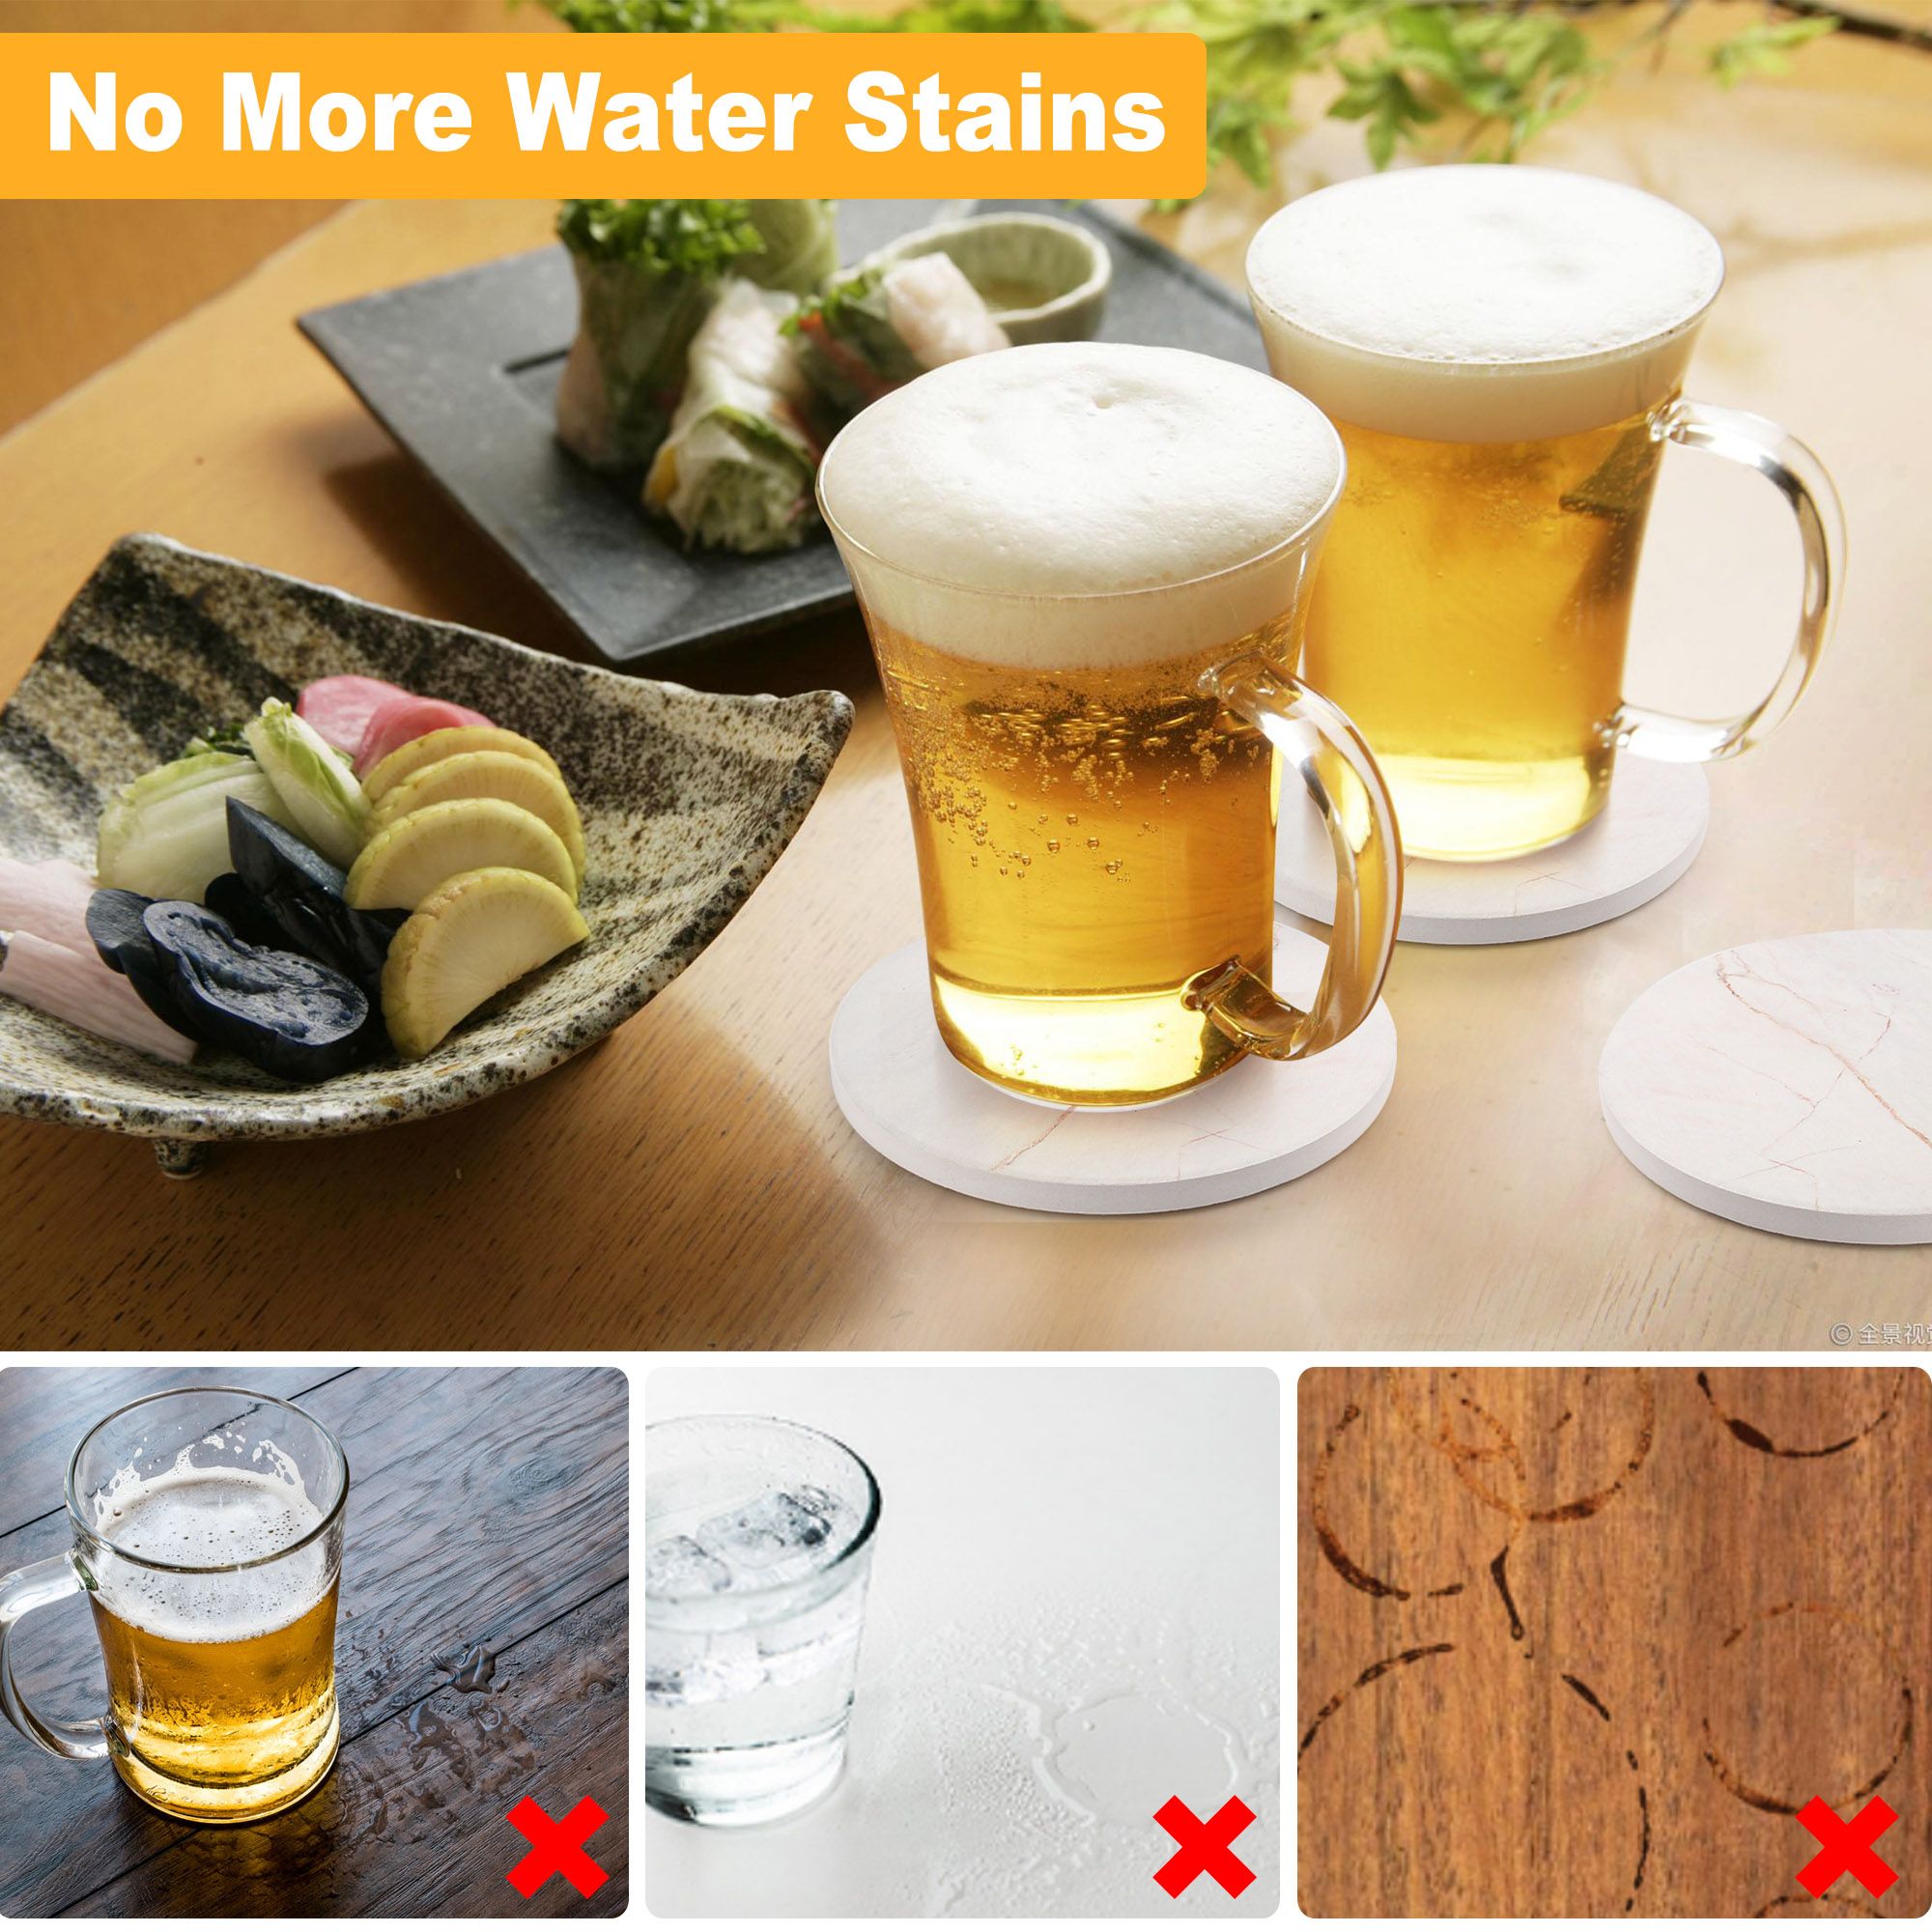 LotFancy 6Pcs 4 in Round Ceramic Coasters for Drinks Absorbent with Holder, Beige, Non-Slip - image 3 of 7